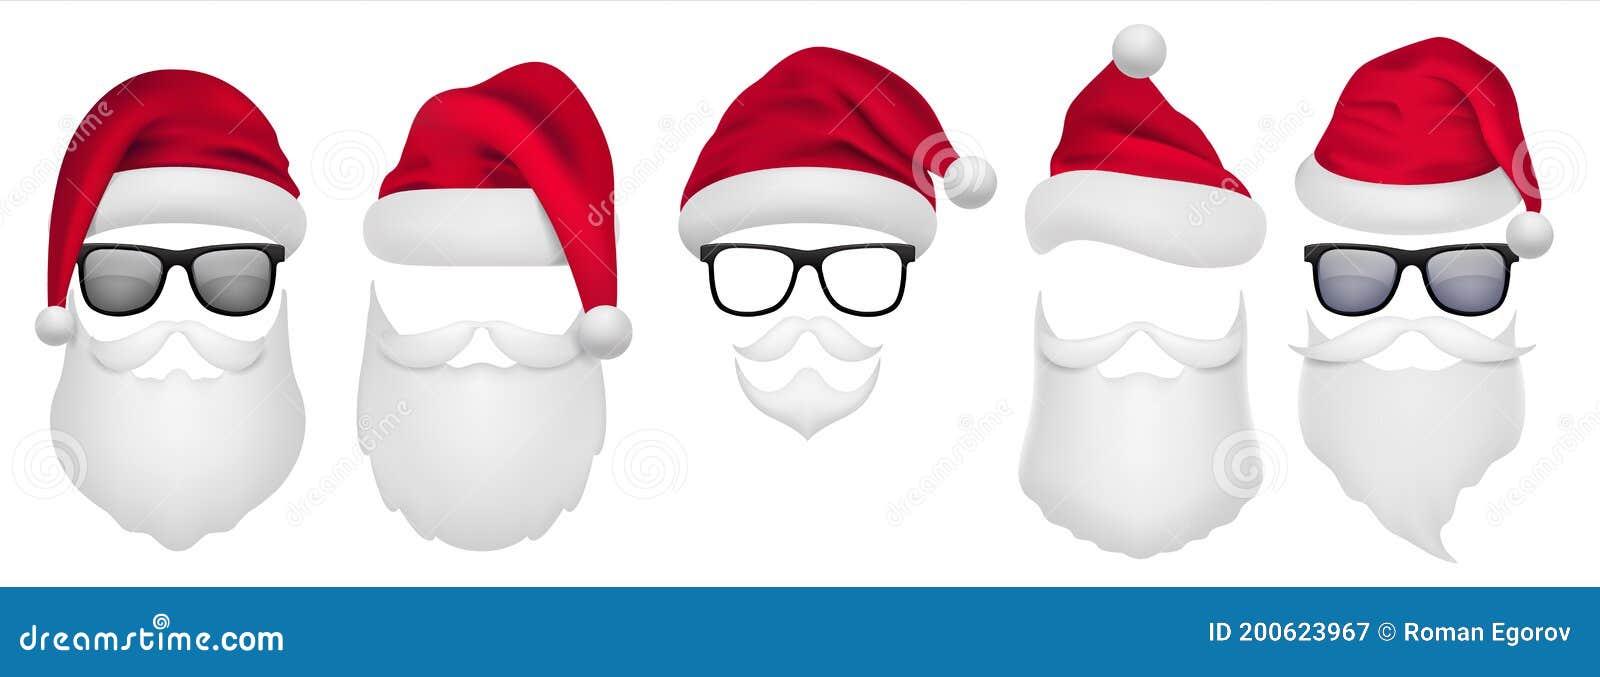 santa claus beard. christmas template, xmas grandfather masks. red hats, glasses and white facial hair and mustaches